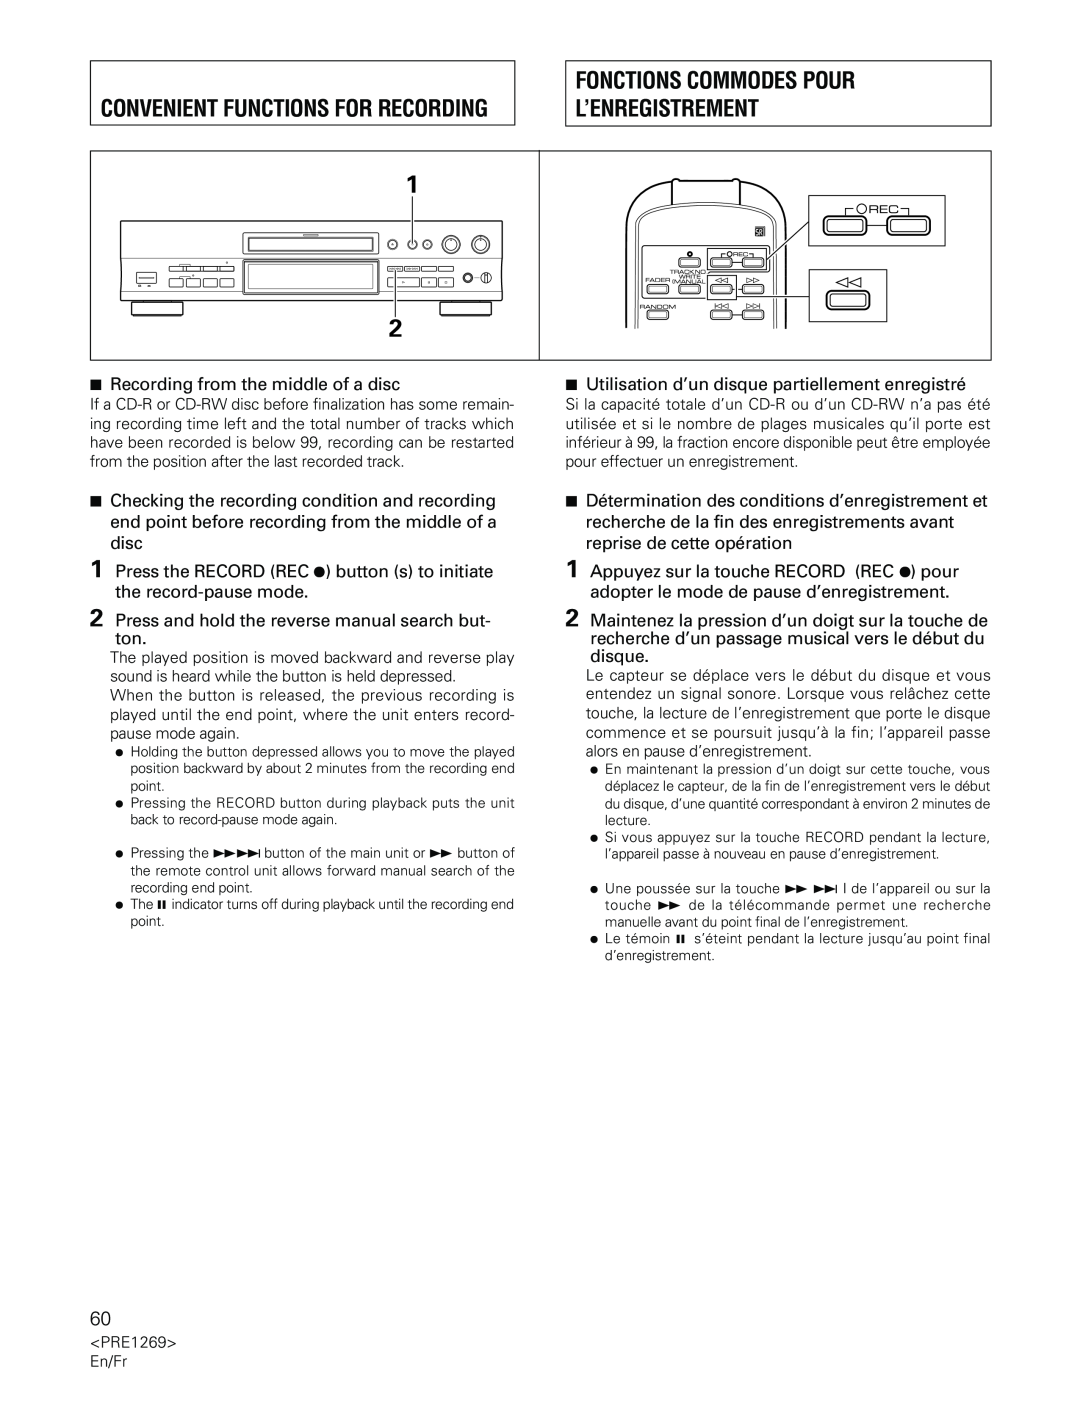 Pioneer PDR-555RW operating instructions Convenient Functions For Recording, Fonctions Commodes Pour L’Enregistrement 